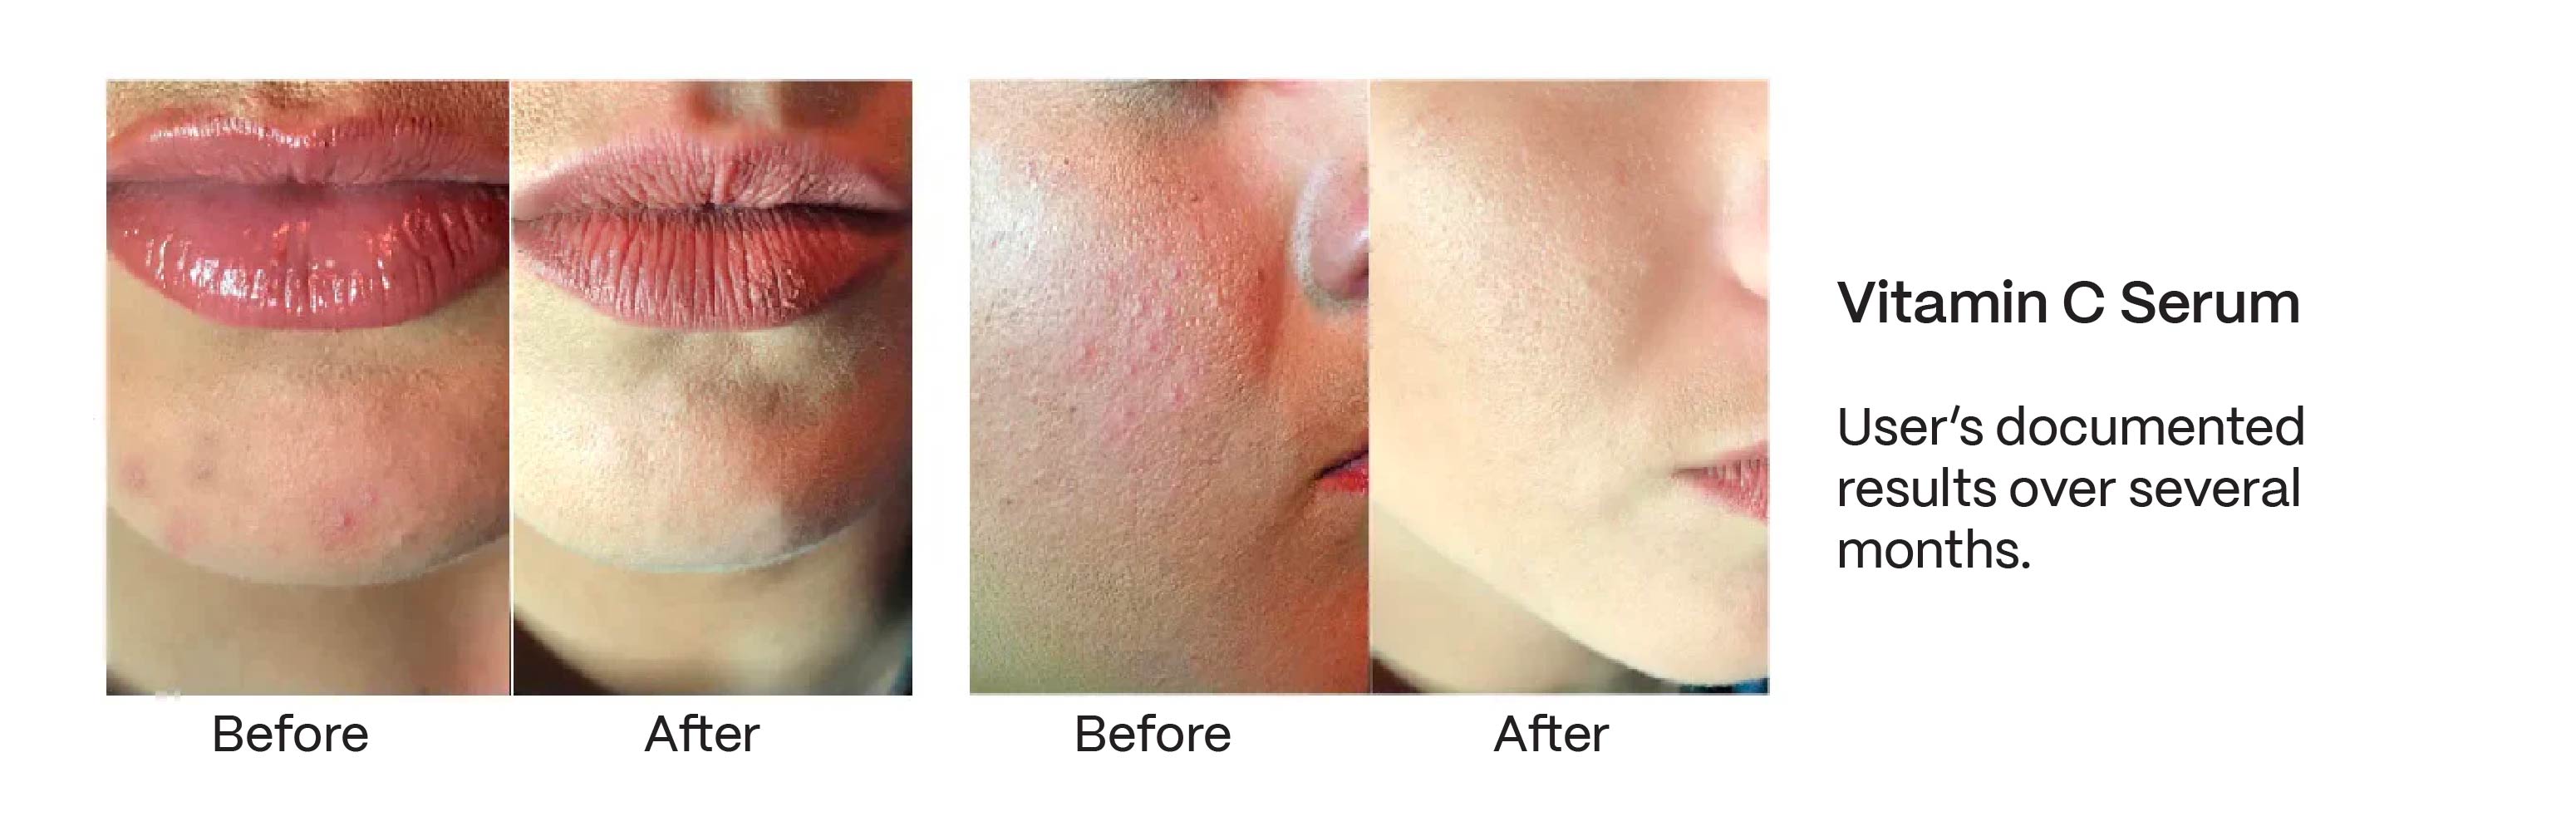 Vitamin C Serum before and after 